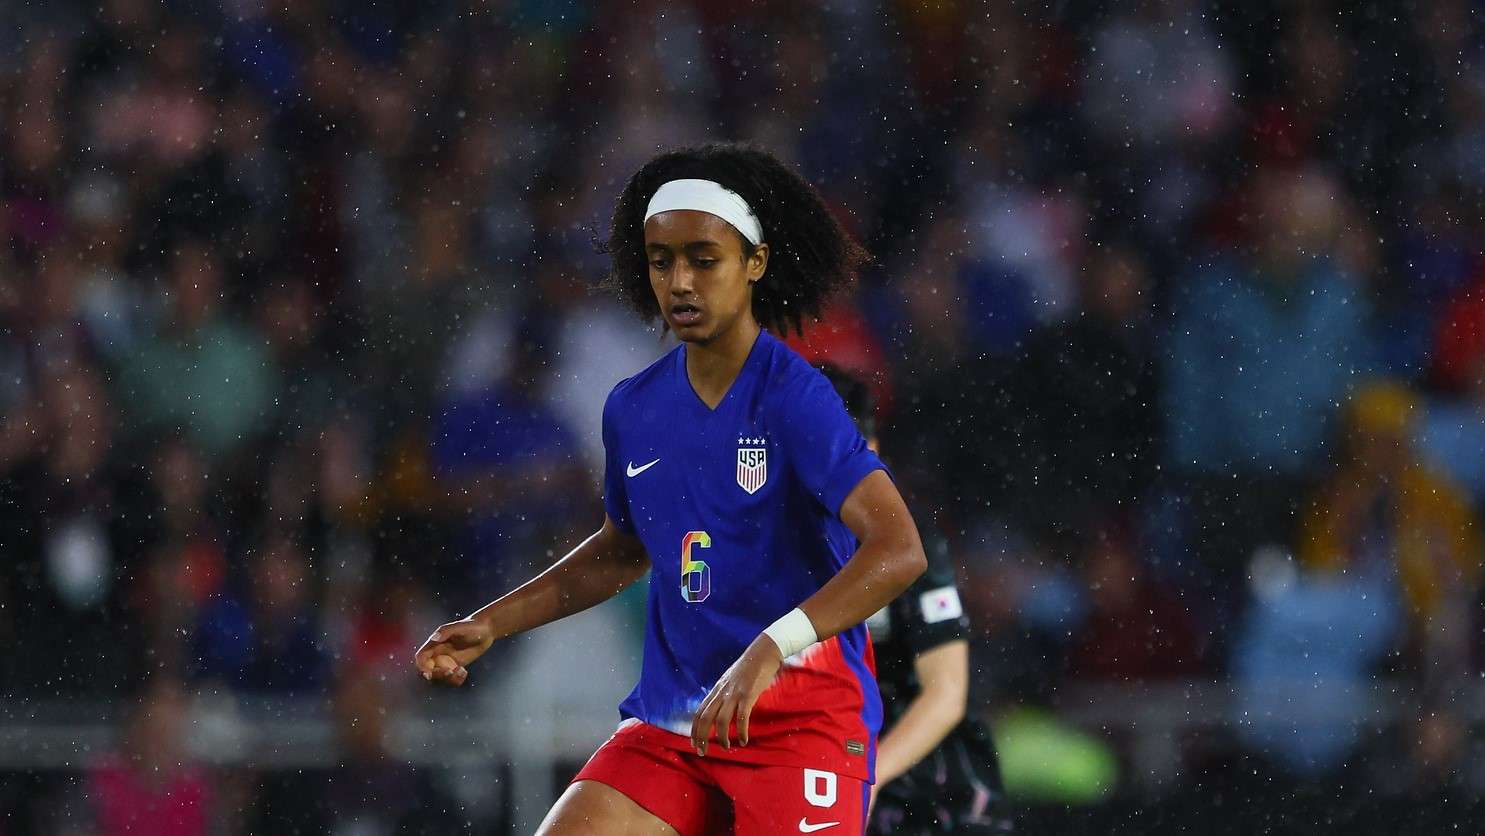 Lily Yohannes USWNT